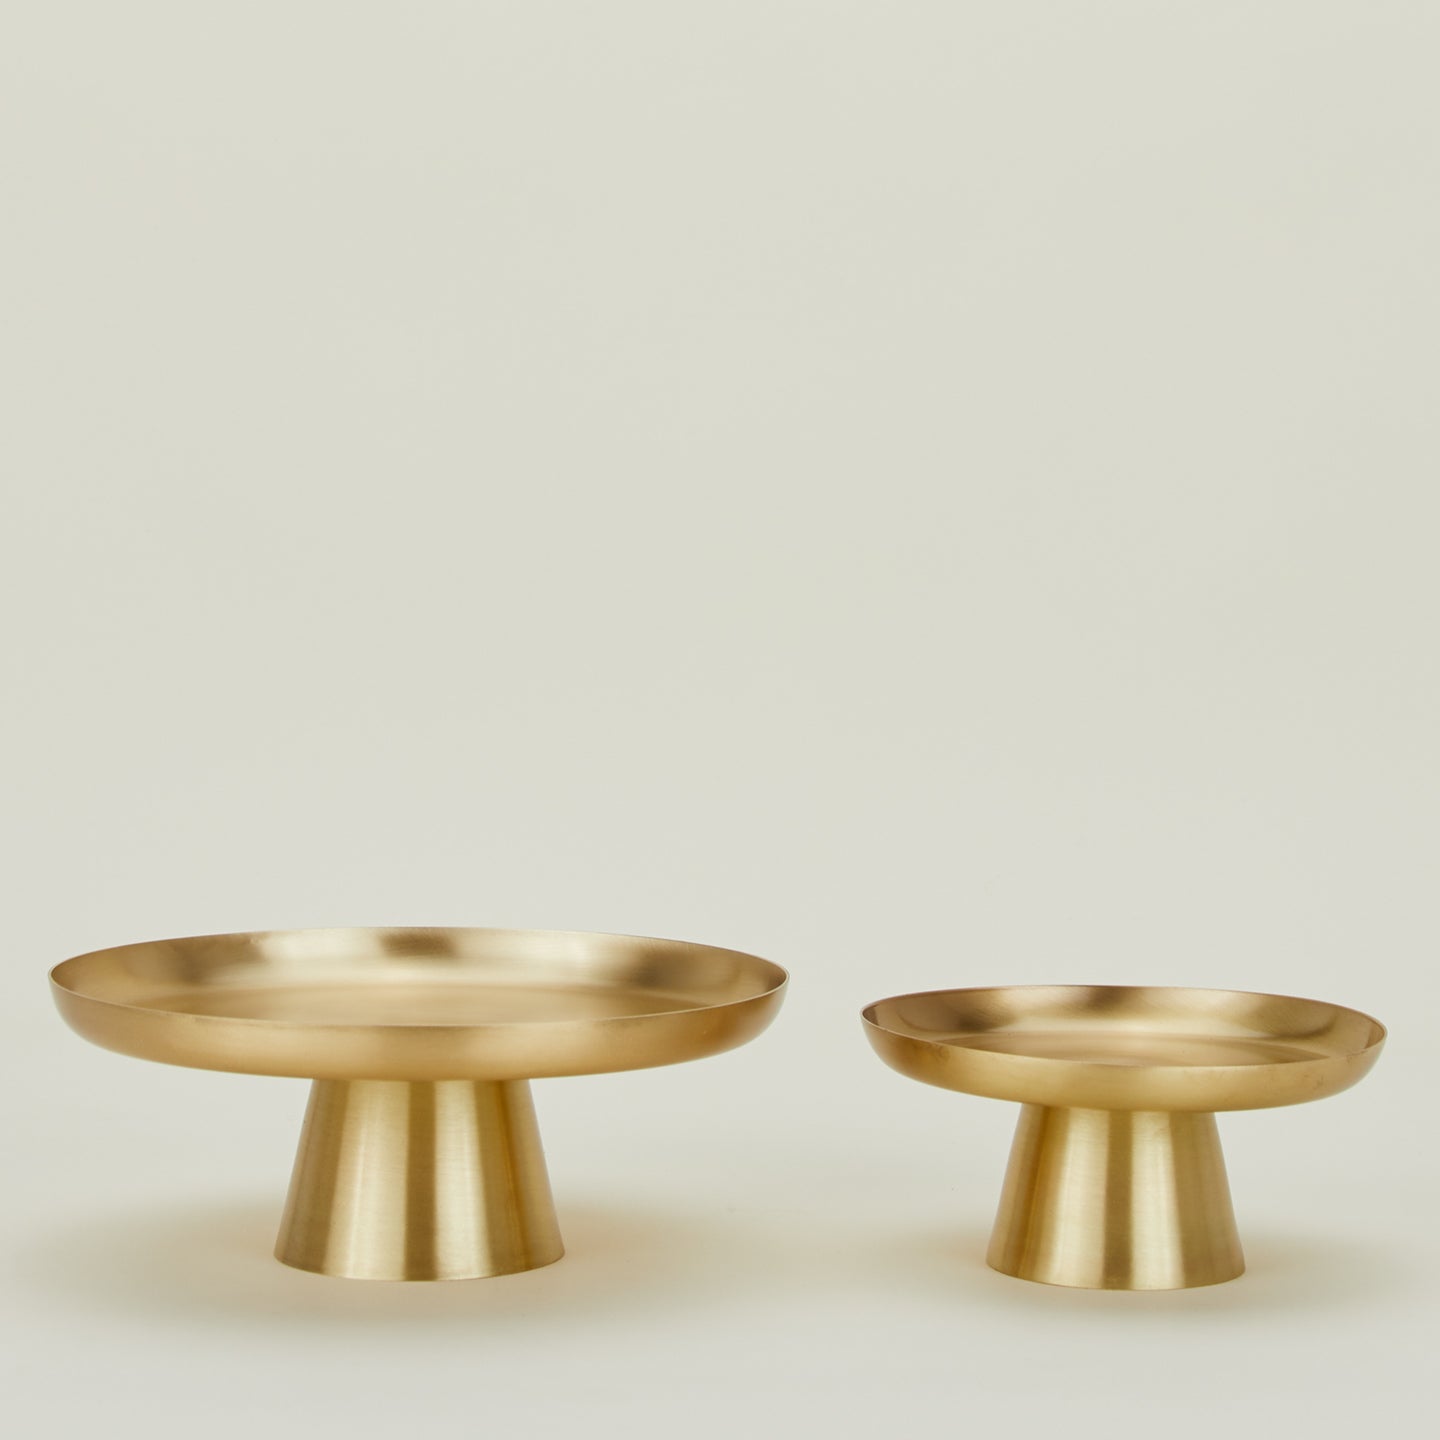 Two Brass Cake Stands in various sizes.